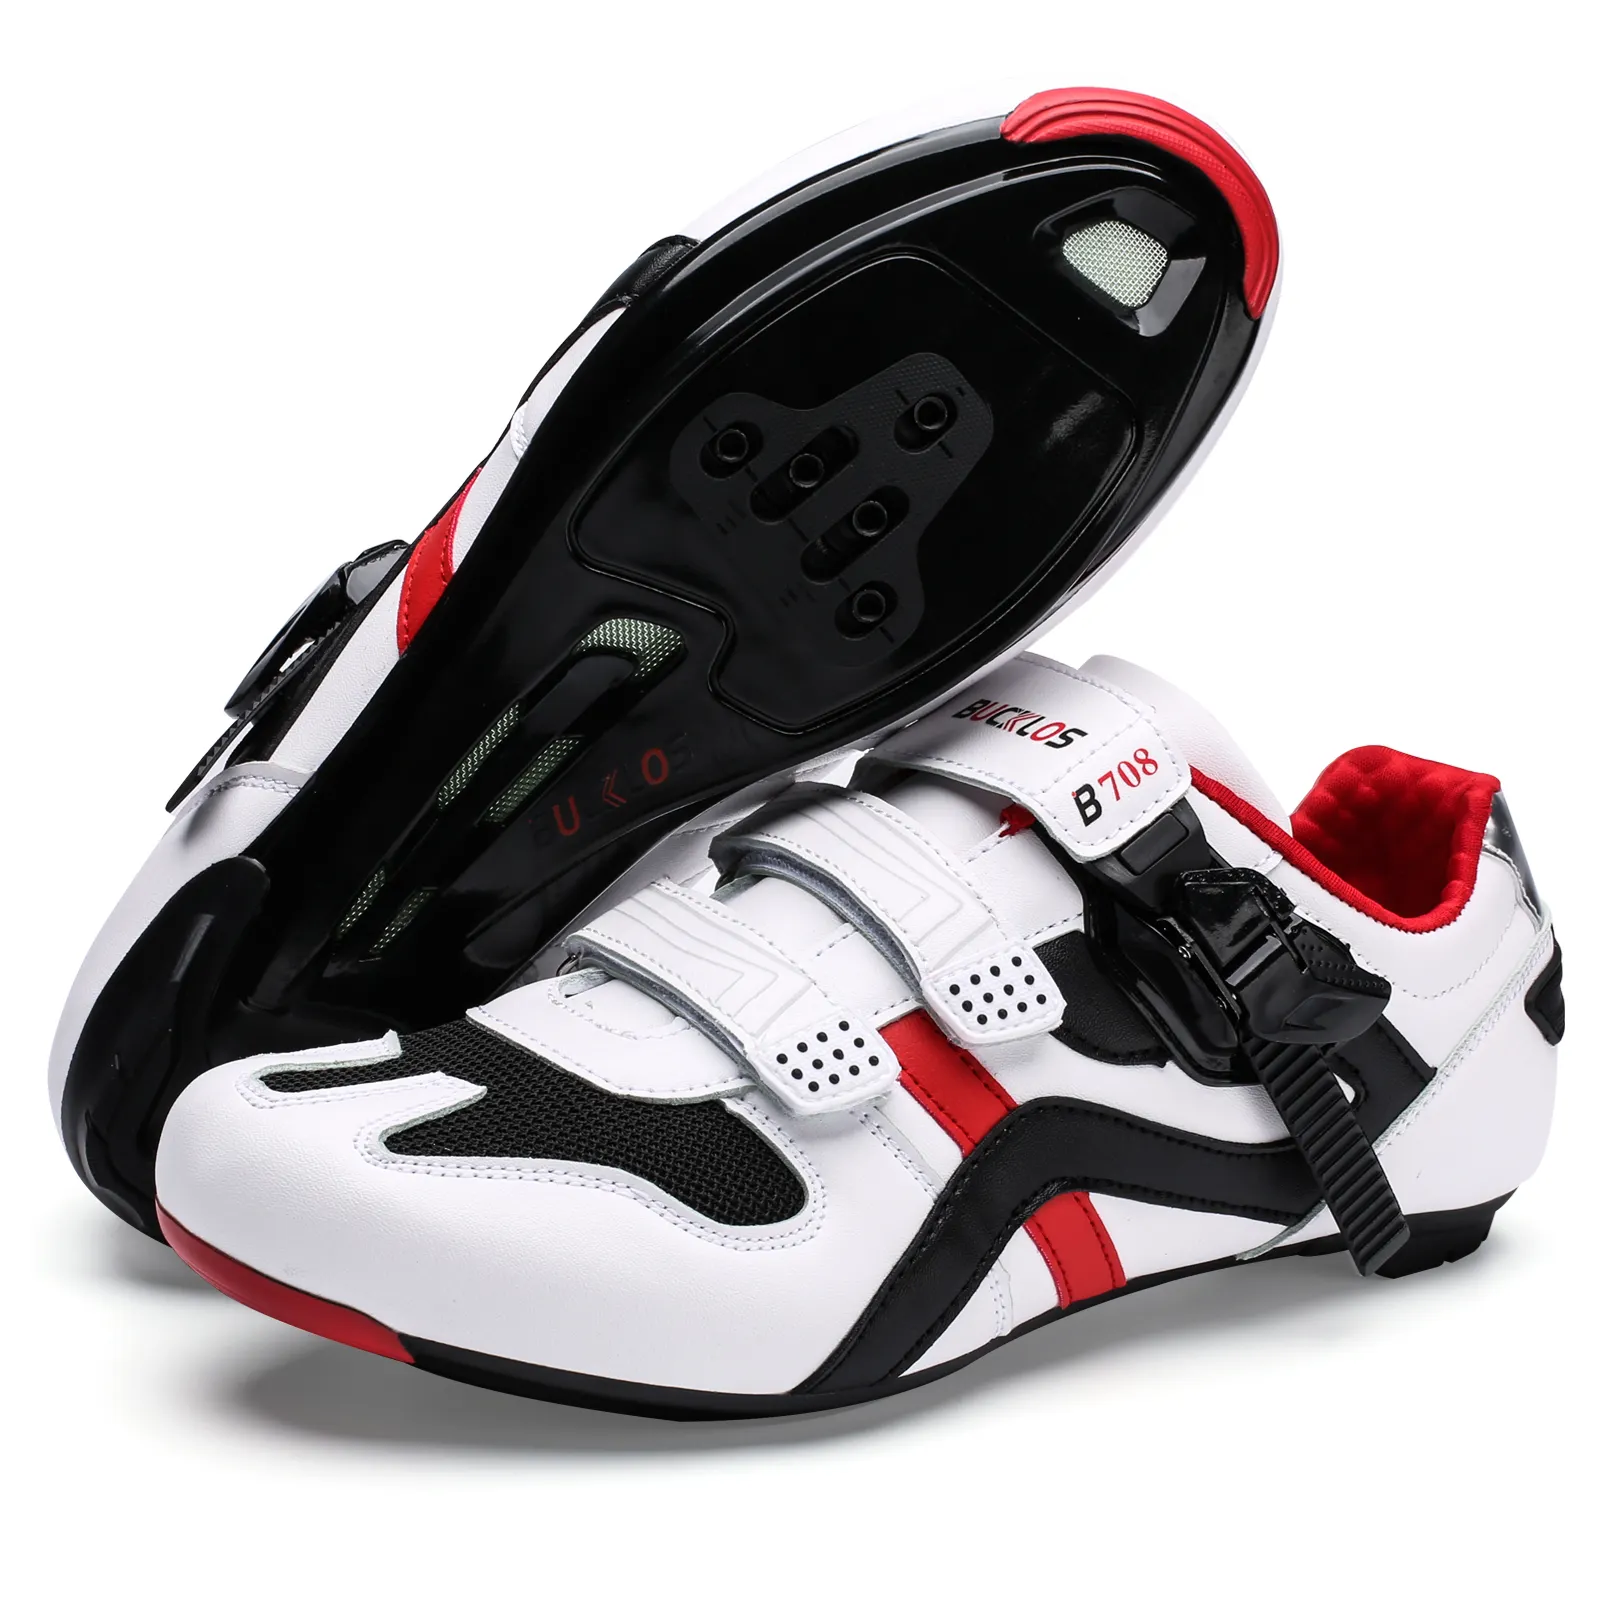 Road Cycling Shoes Mens Precise Buckle Strap Compatible with Peloton Biking Shoes Spin Shoes Bicycle Sneakers for SPD Lock Pedal